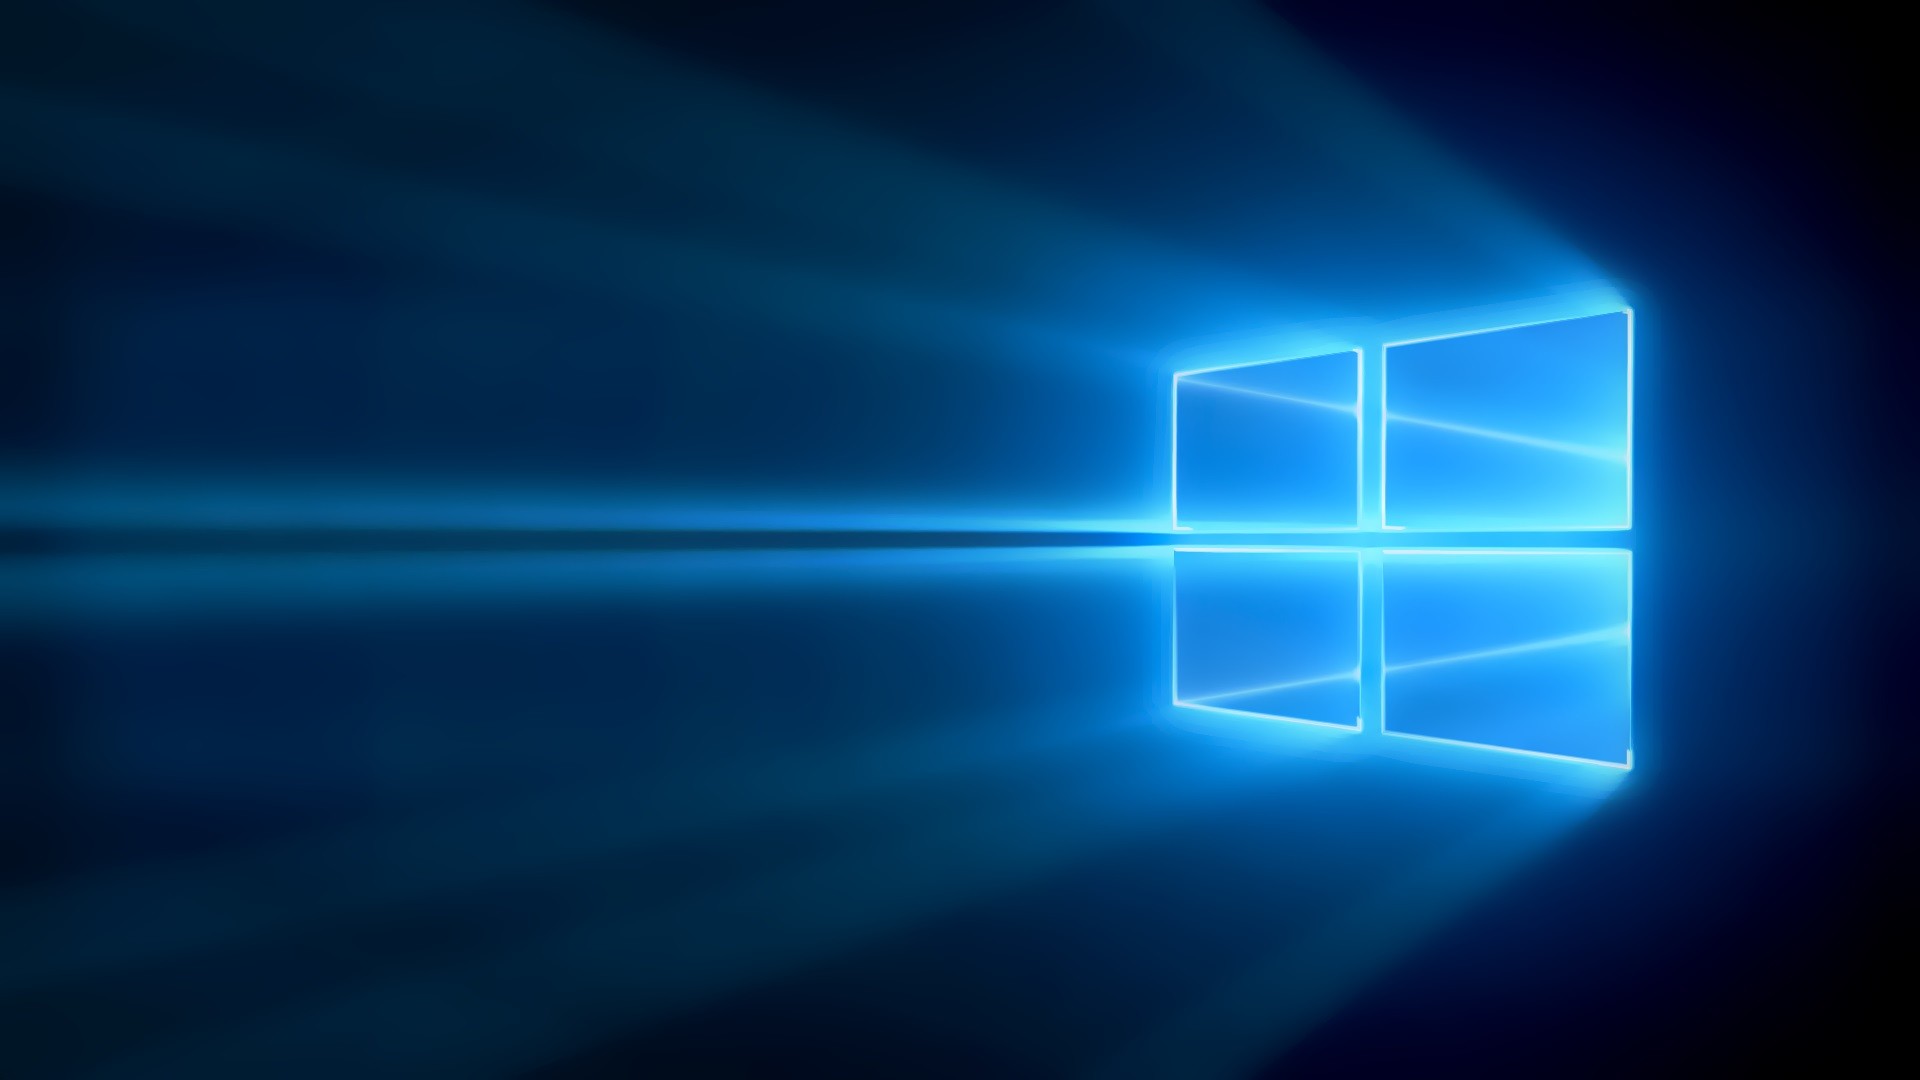 Microsoft Confirms Desktop Screen Flashes Bug in Windows 10, Offers Fix